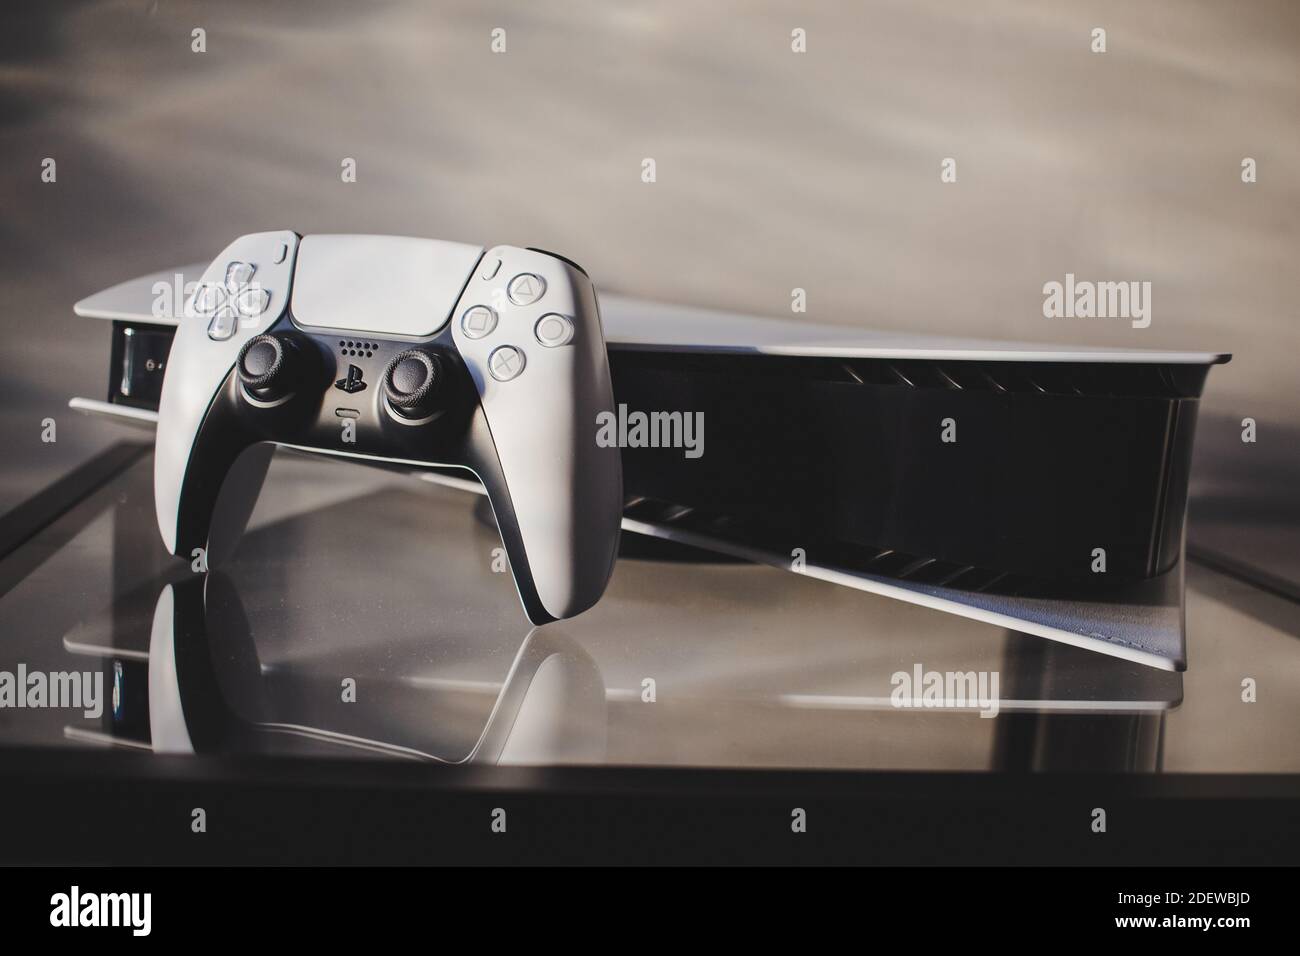 PlayStation 5 on its side with the DualSense controller Stock Photo